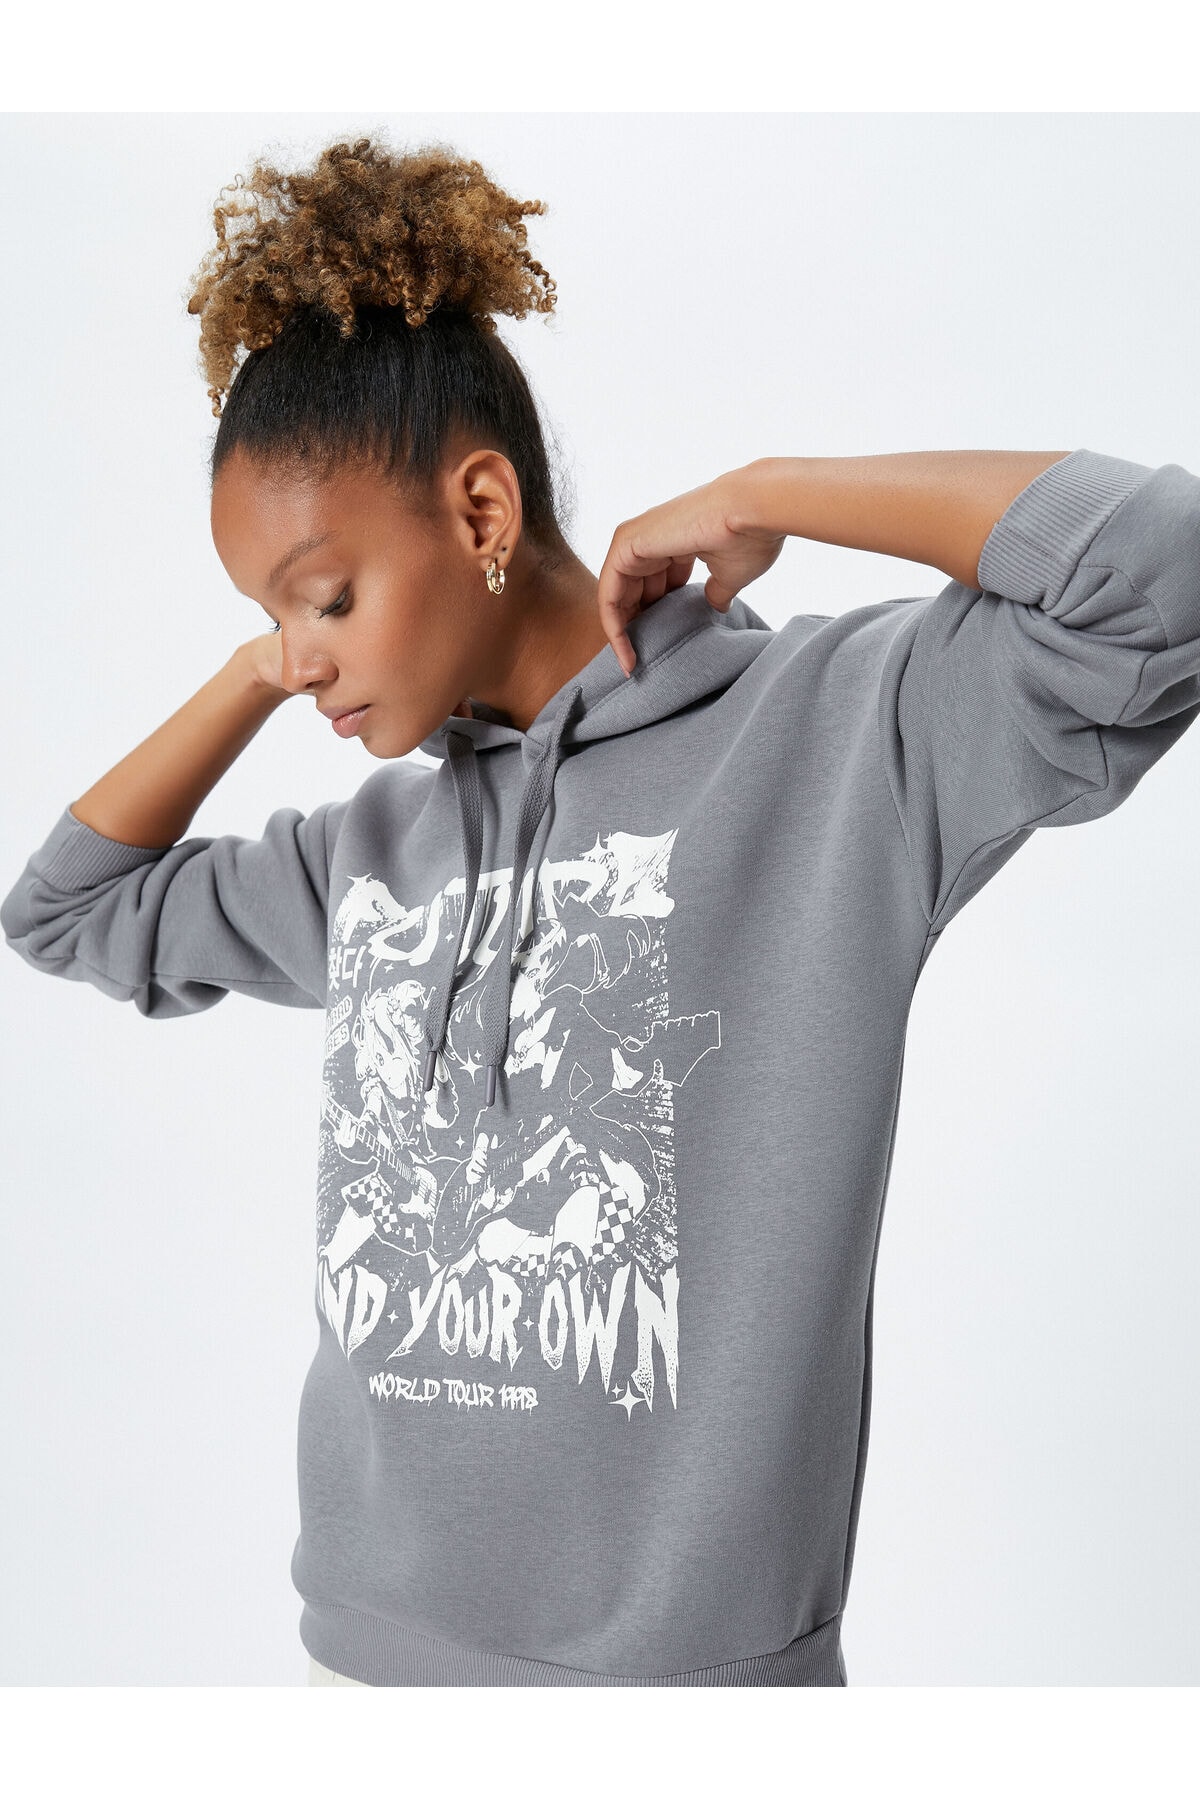 Levně Koton Hooded Sweatshirt with a slogan printed, relaxed fit and long sleeve.